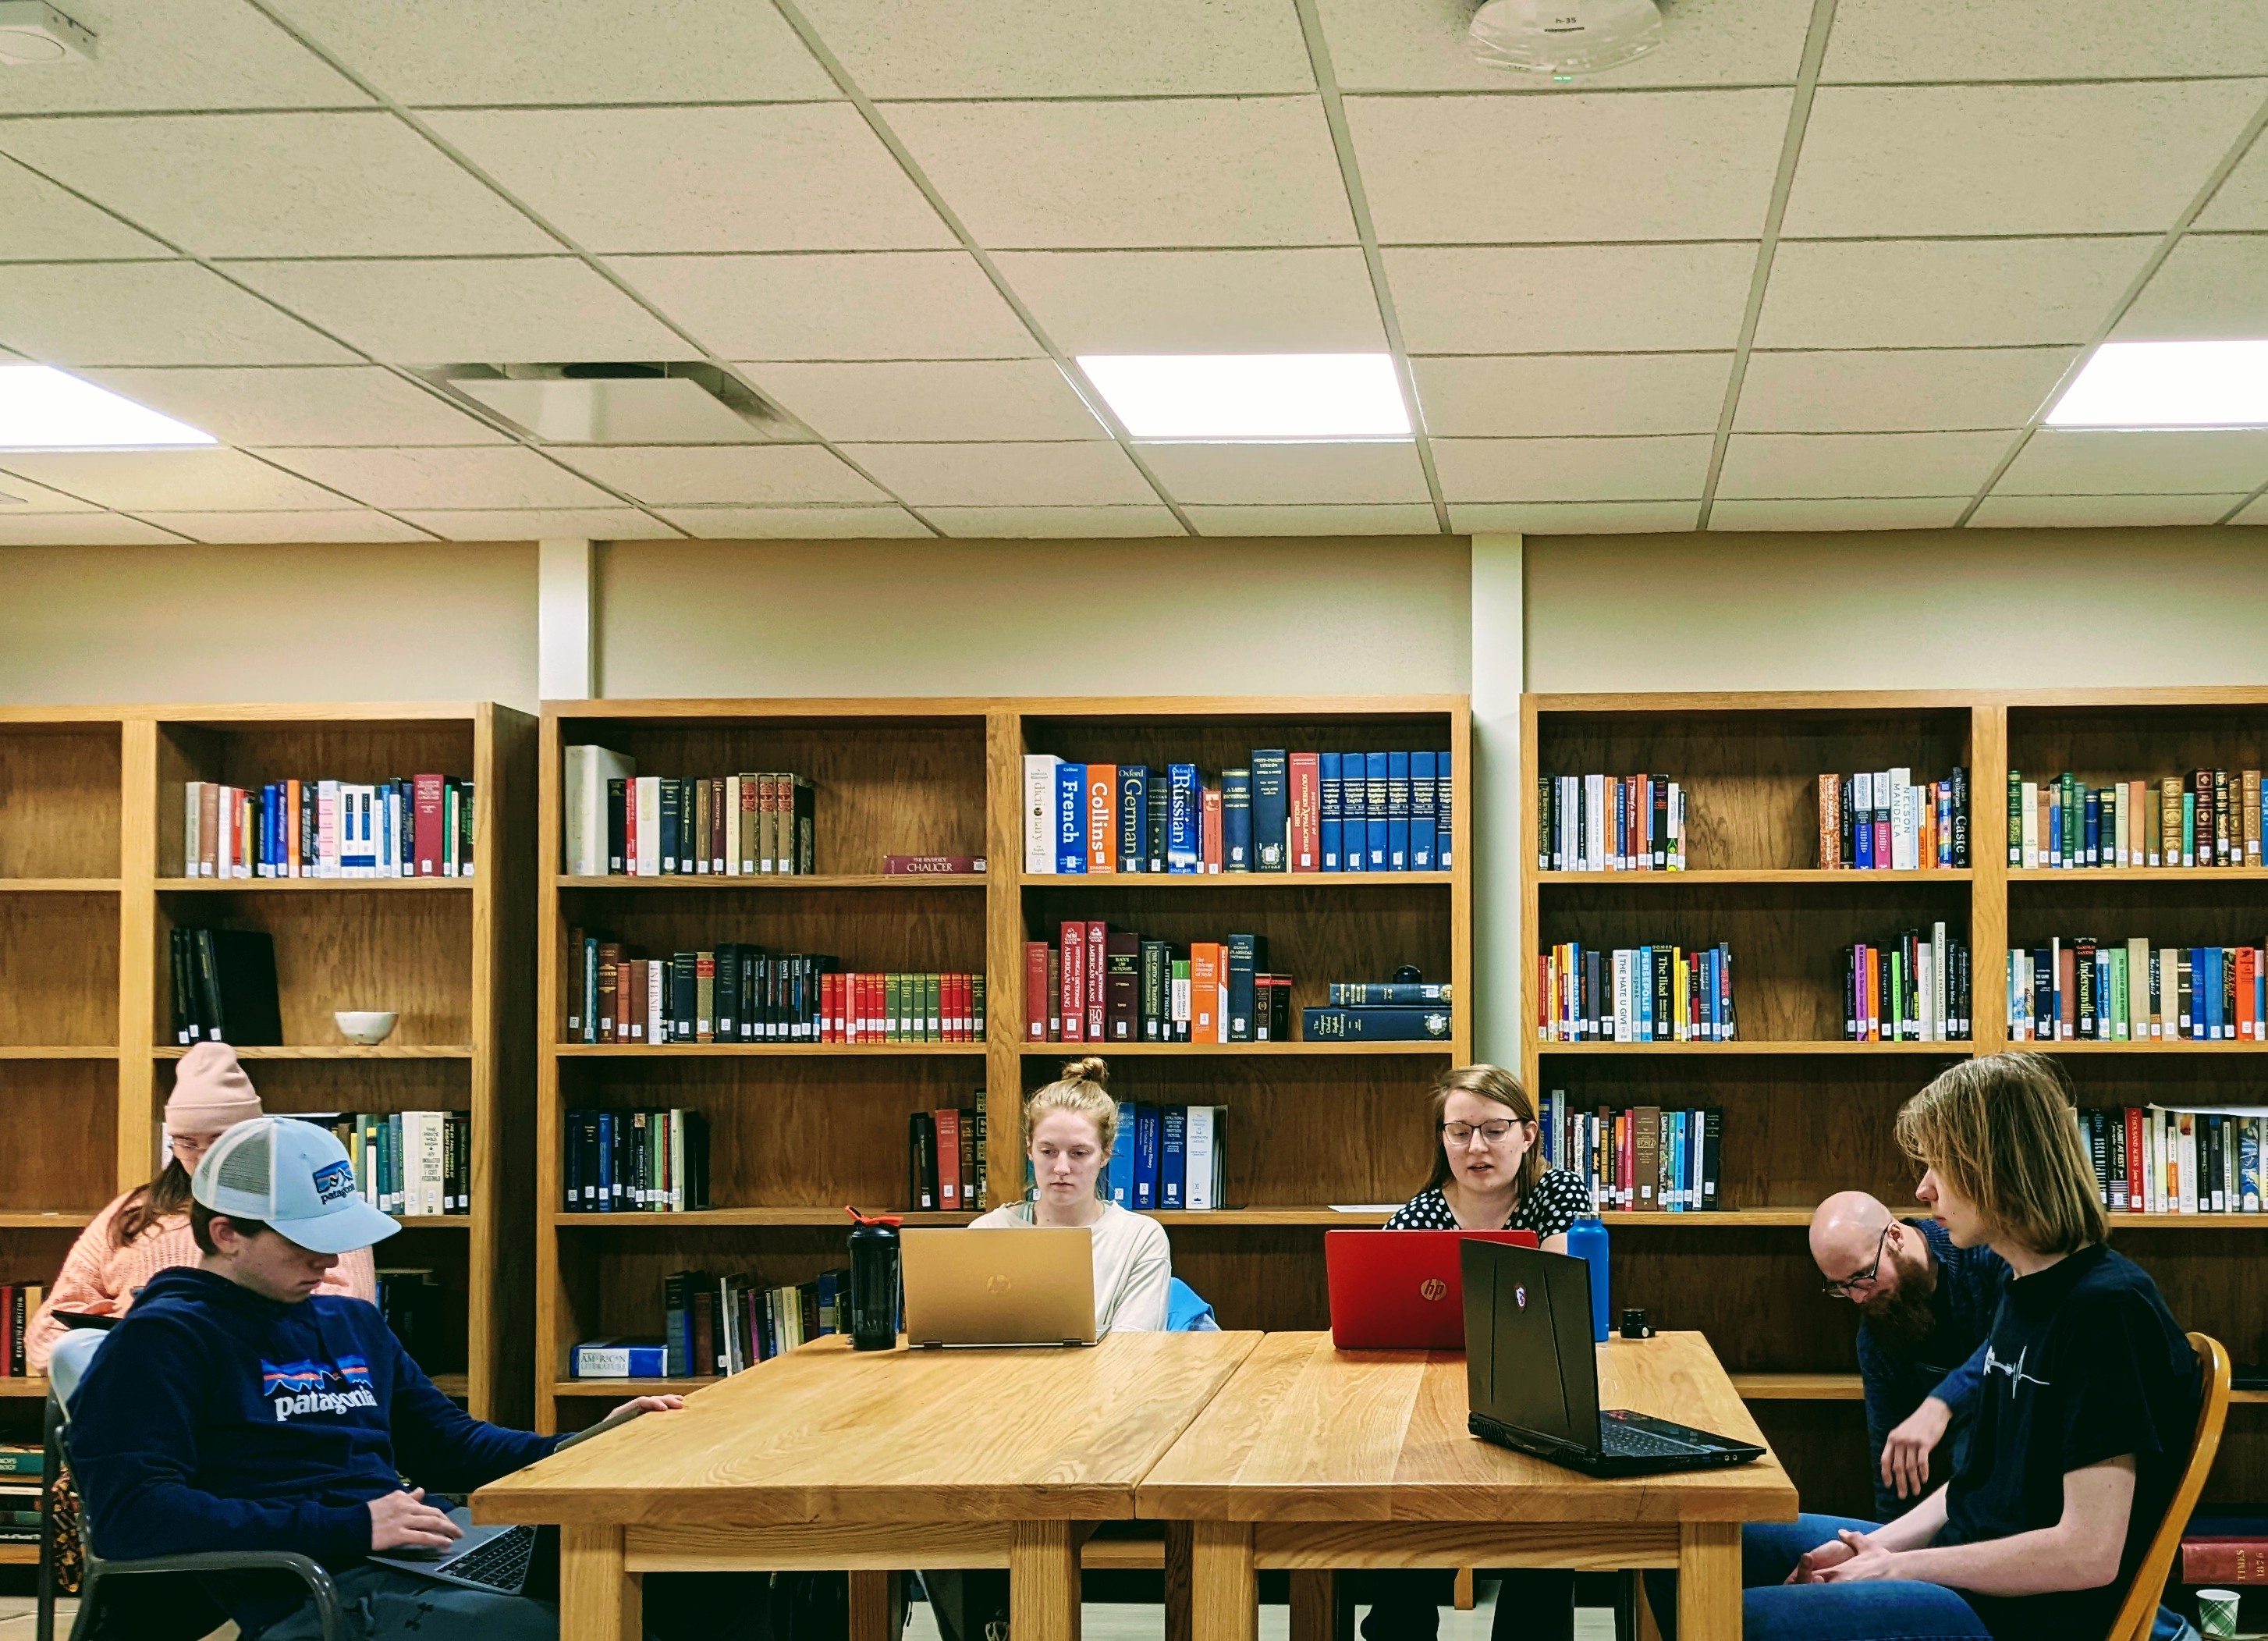 Students gathered around a table in a library setting